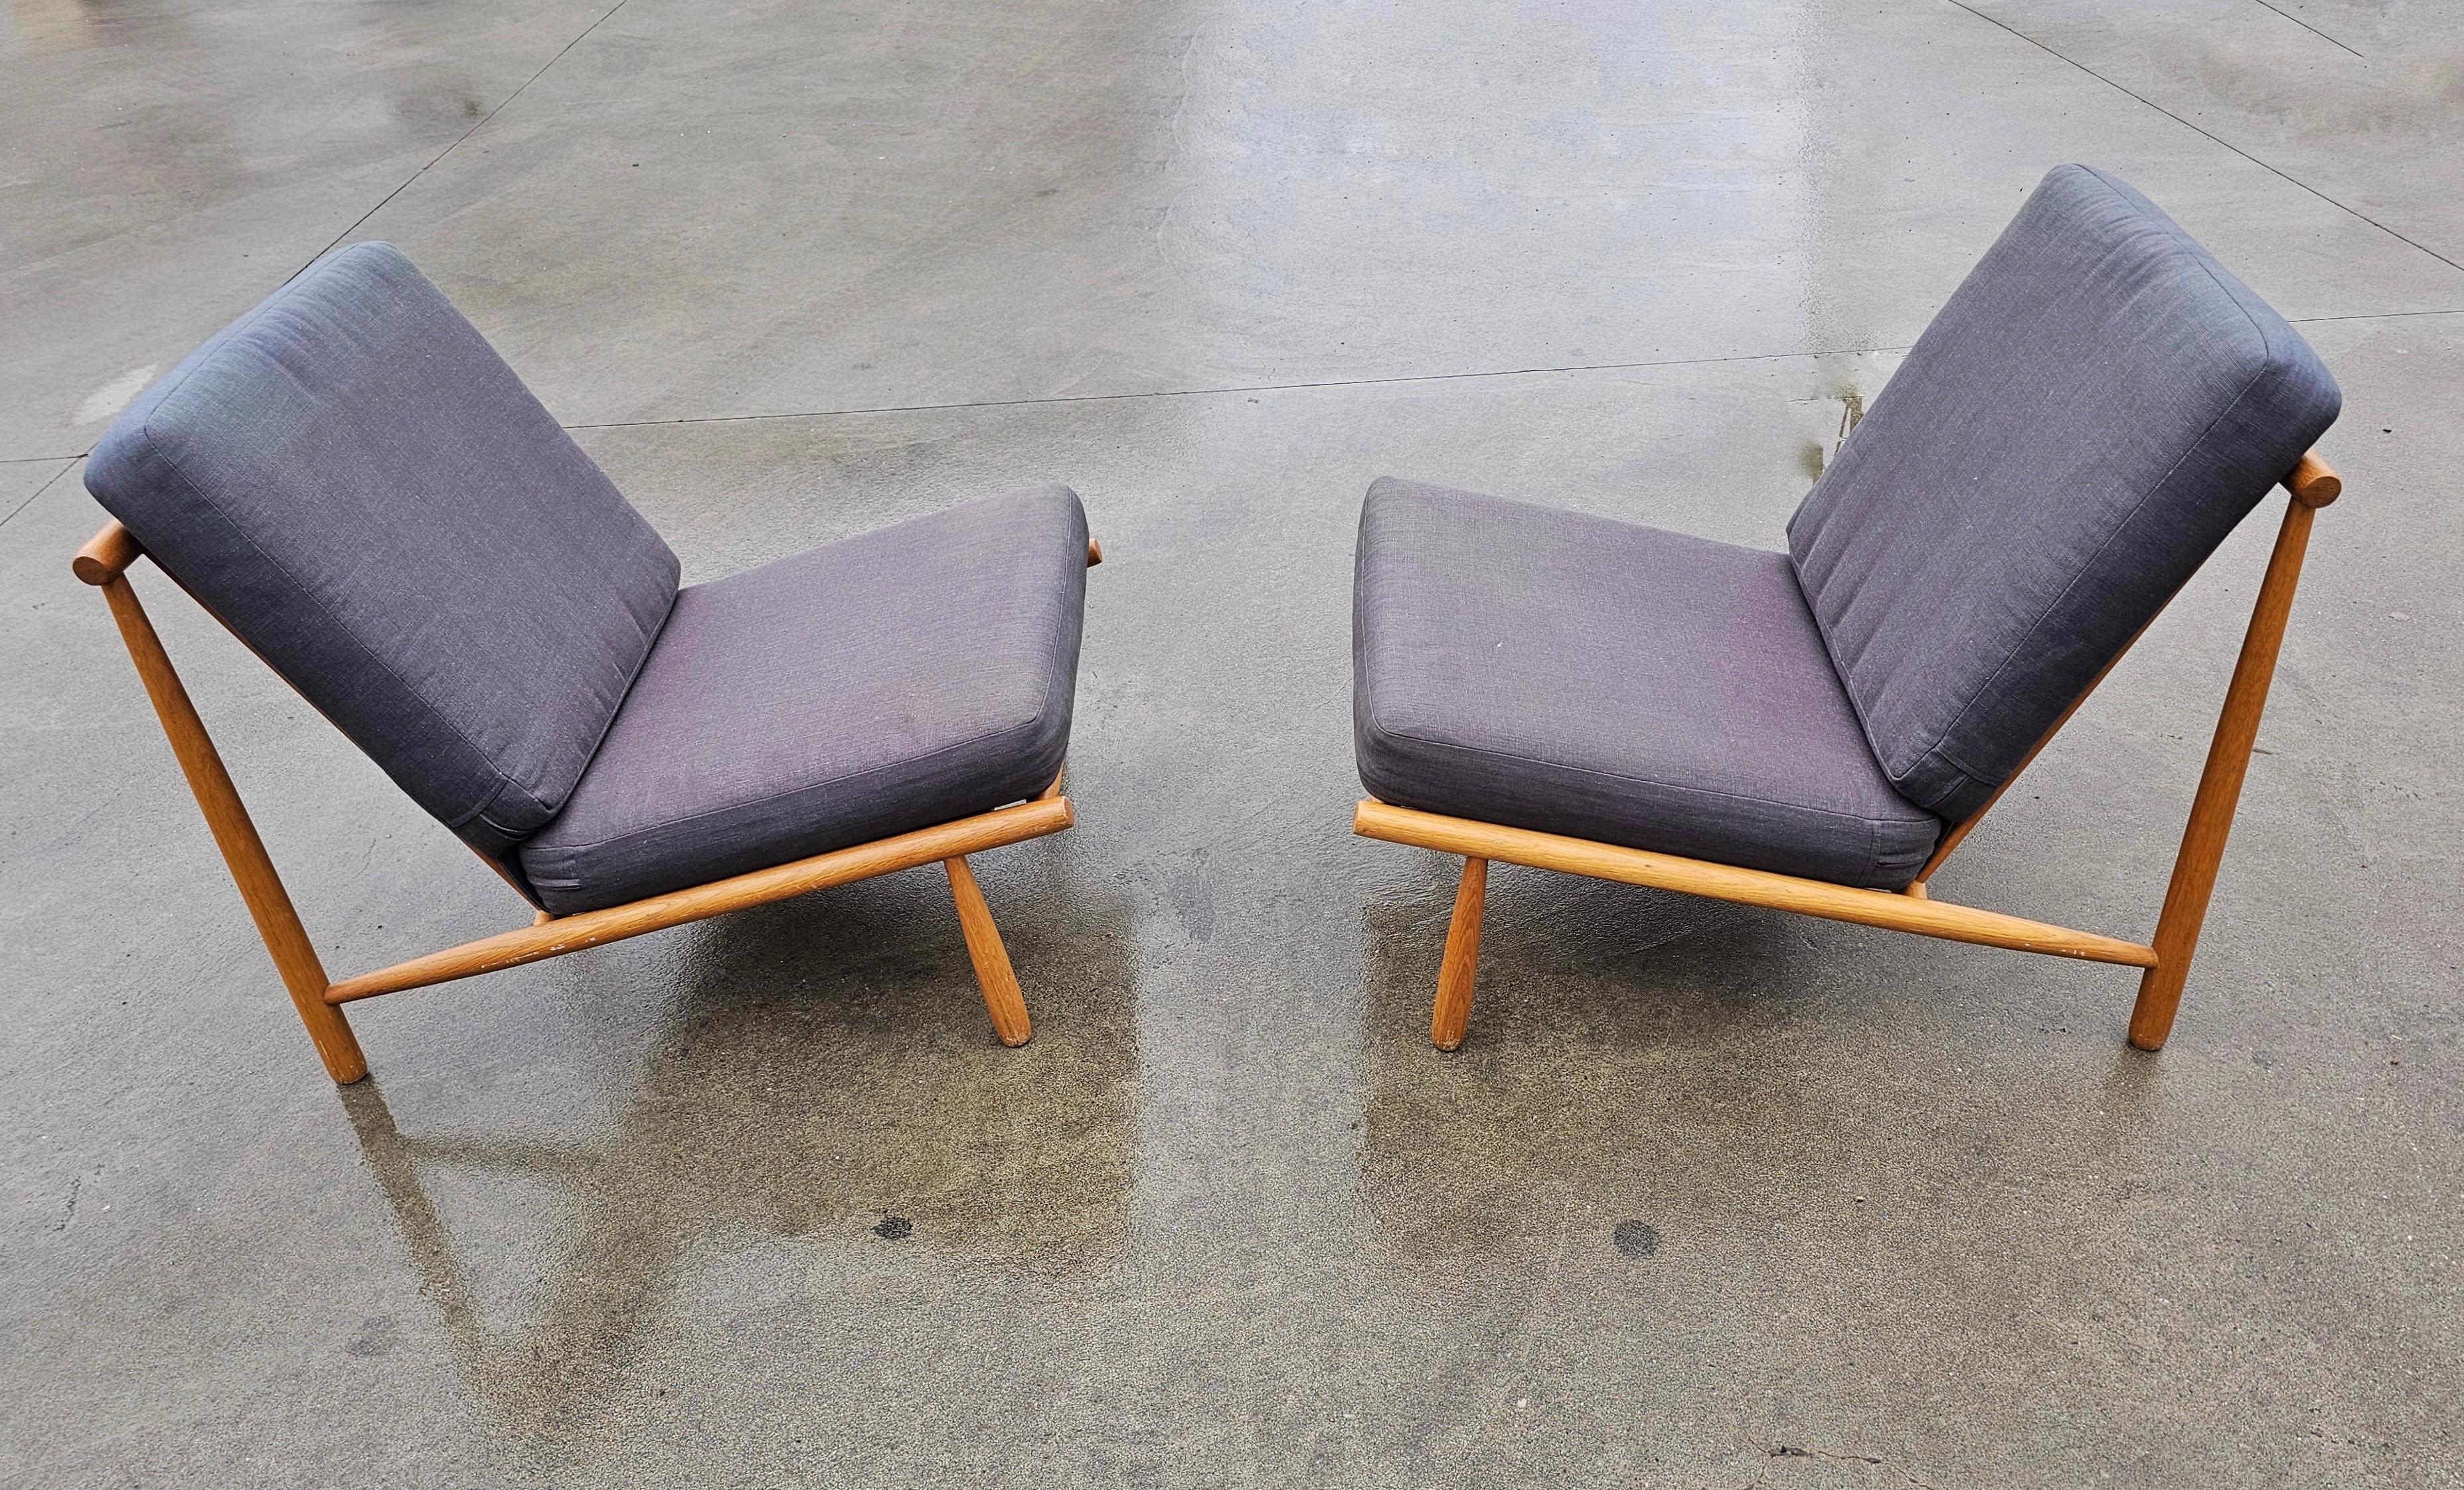 In this listing you will find a rare pair of Mid Century Modern Lounge Chairs Model 'Domus'. They were designed by Alf Svensson for Dux of Sweden. Featuring elegant design, made of beech, with dark gray cushions. Made in Sweden in 1960s.

Very good